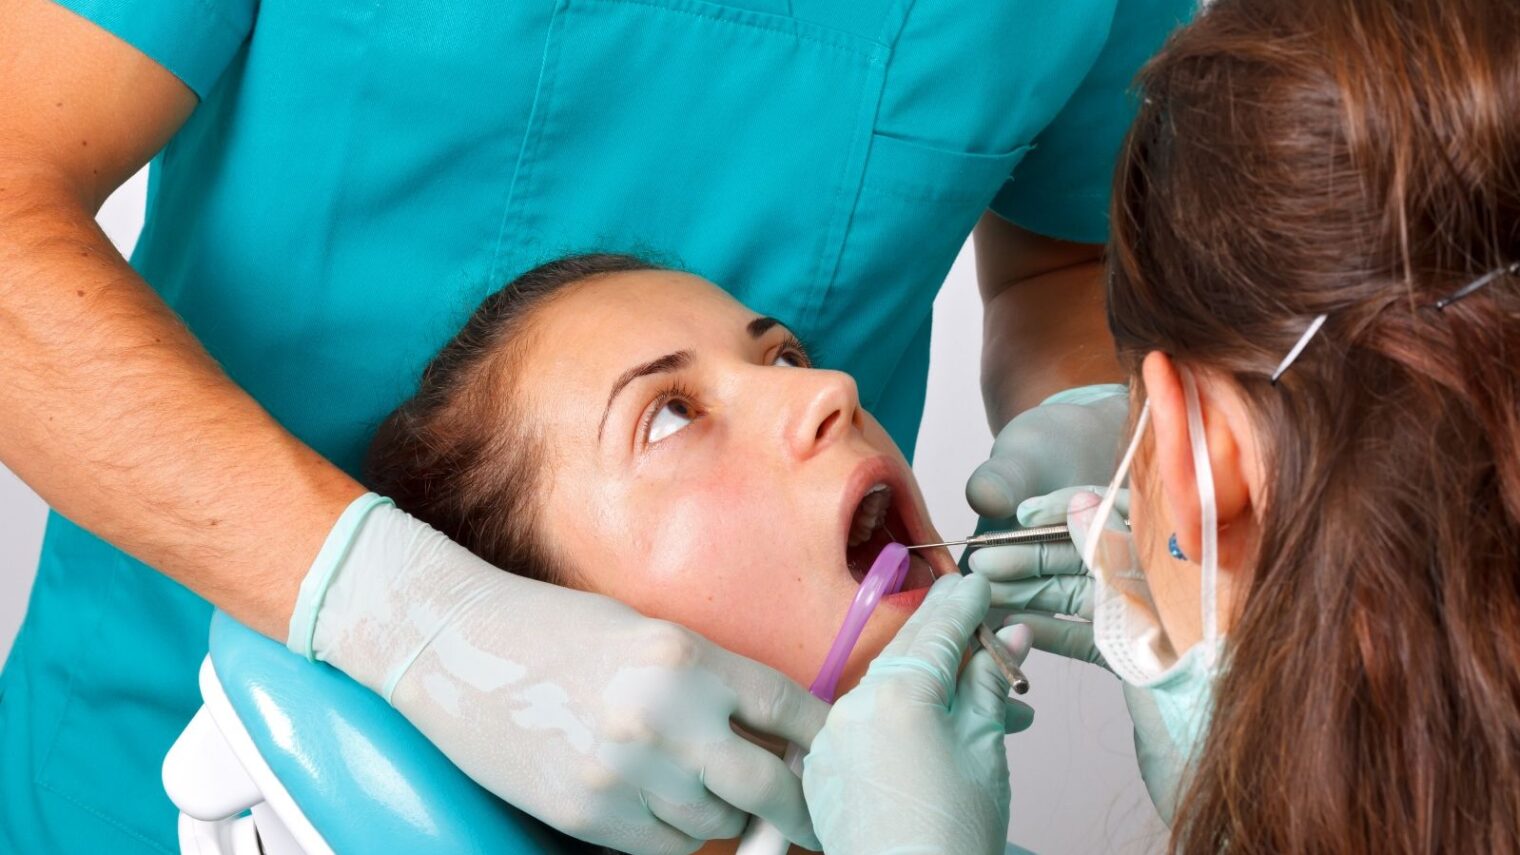 Dental instruments are among devices that can have harmful biofilm. Image via Shutterstock.com